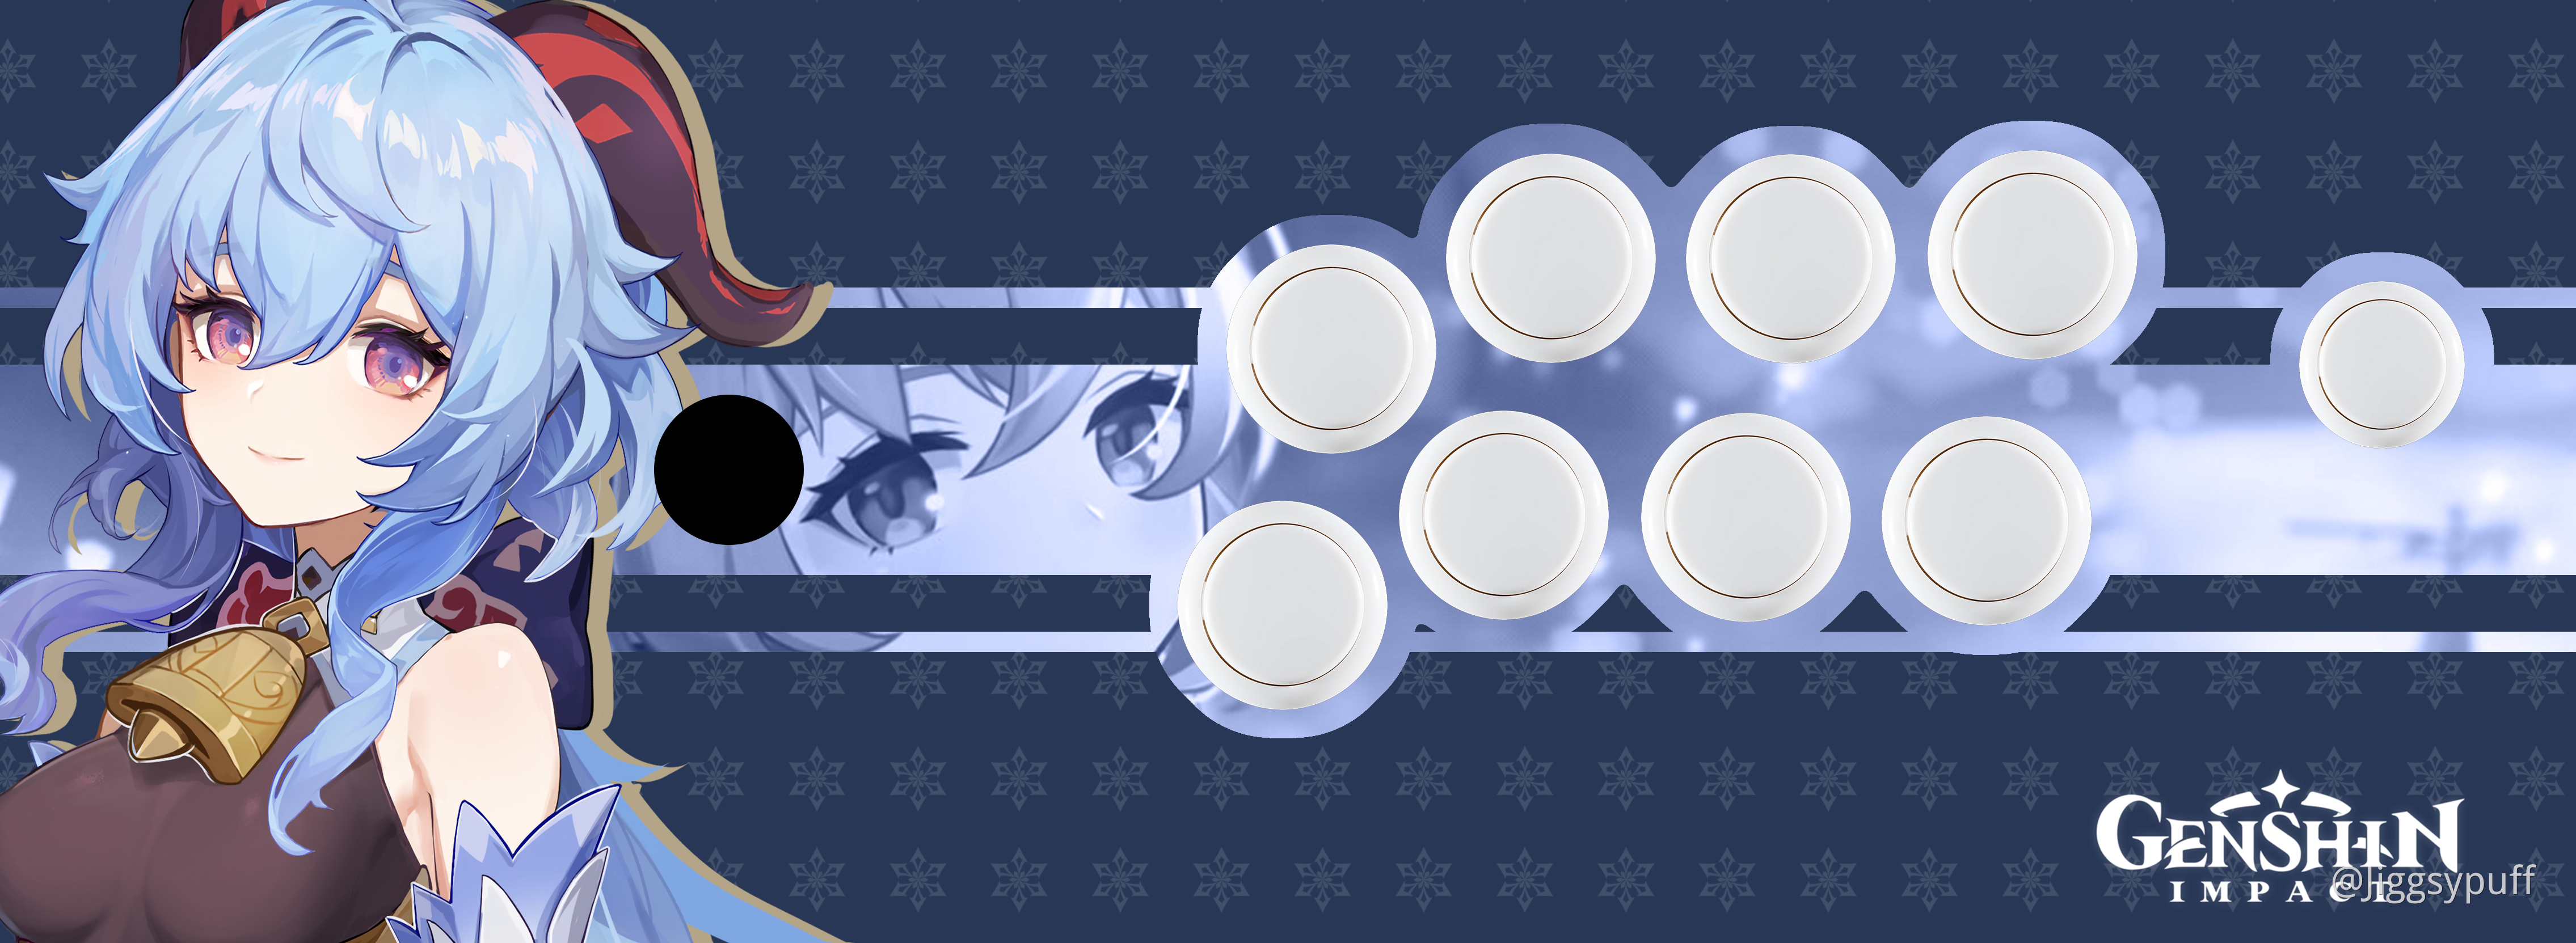 Designing custom persona fightstick art. help me pick! - General Discussion  - Giant Bomb